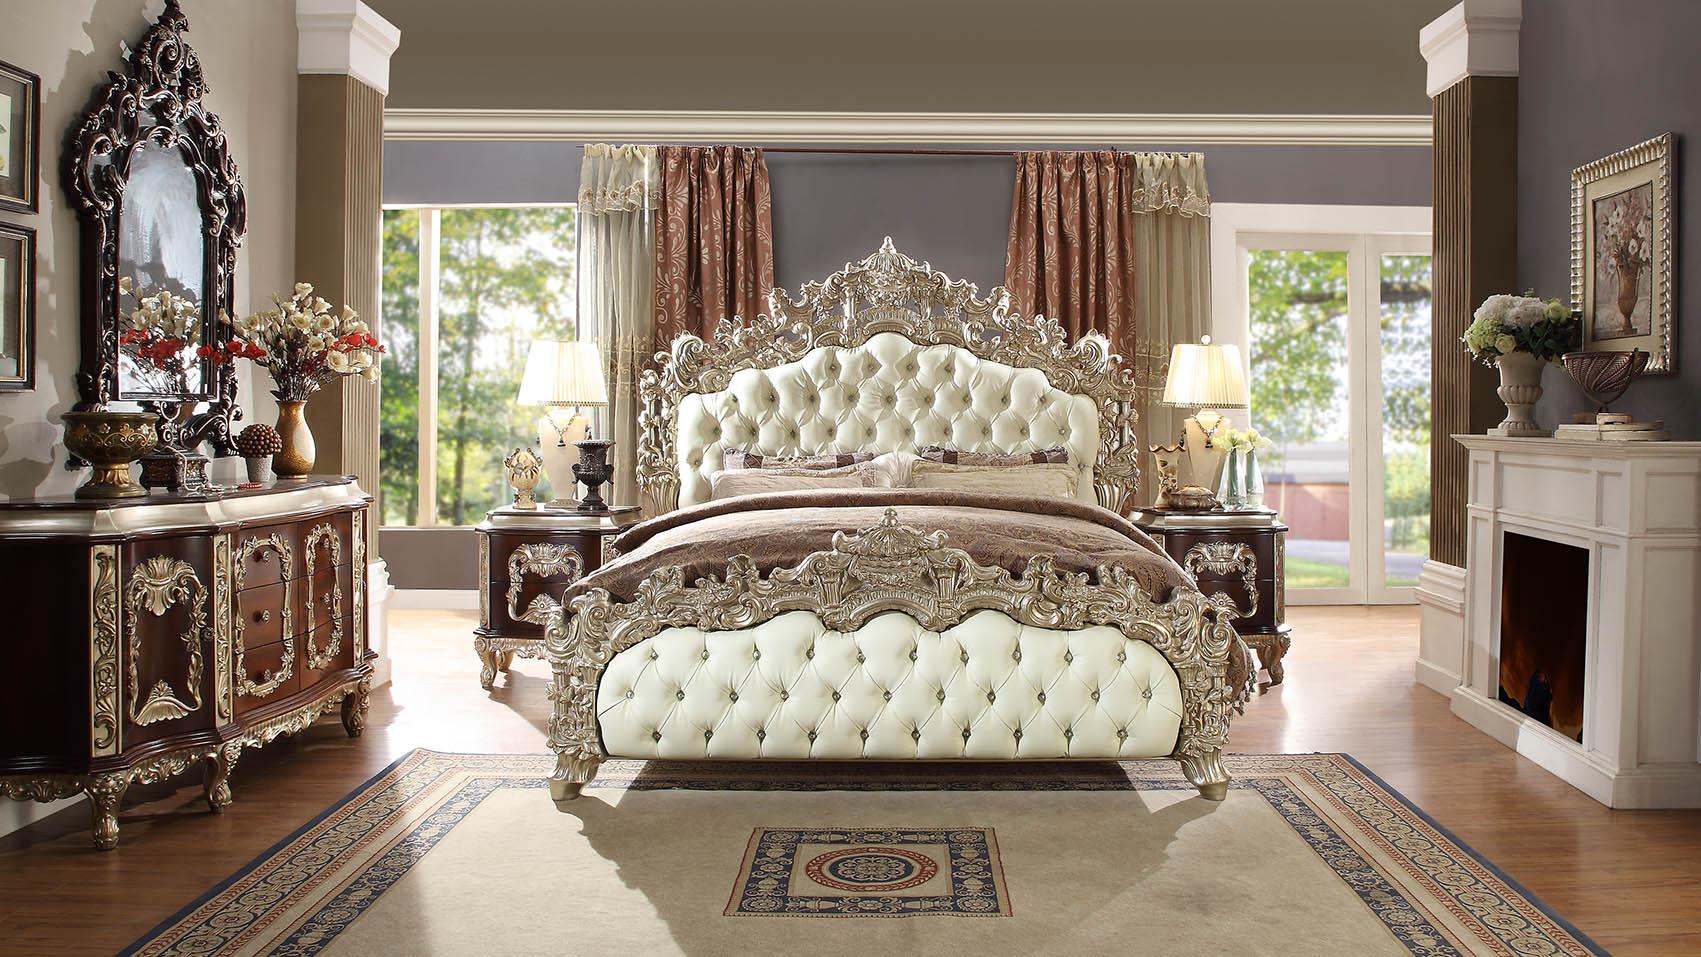 

    
Antique White Silver Cal King Bedroom Set 5Pcs Traditional Homey Design HD-8017
